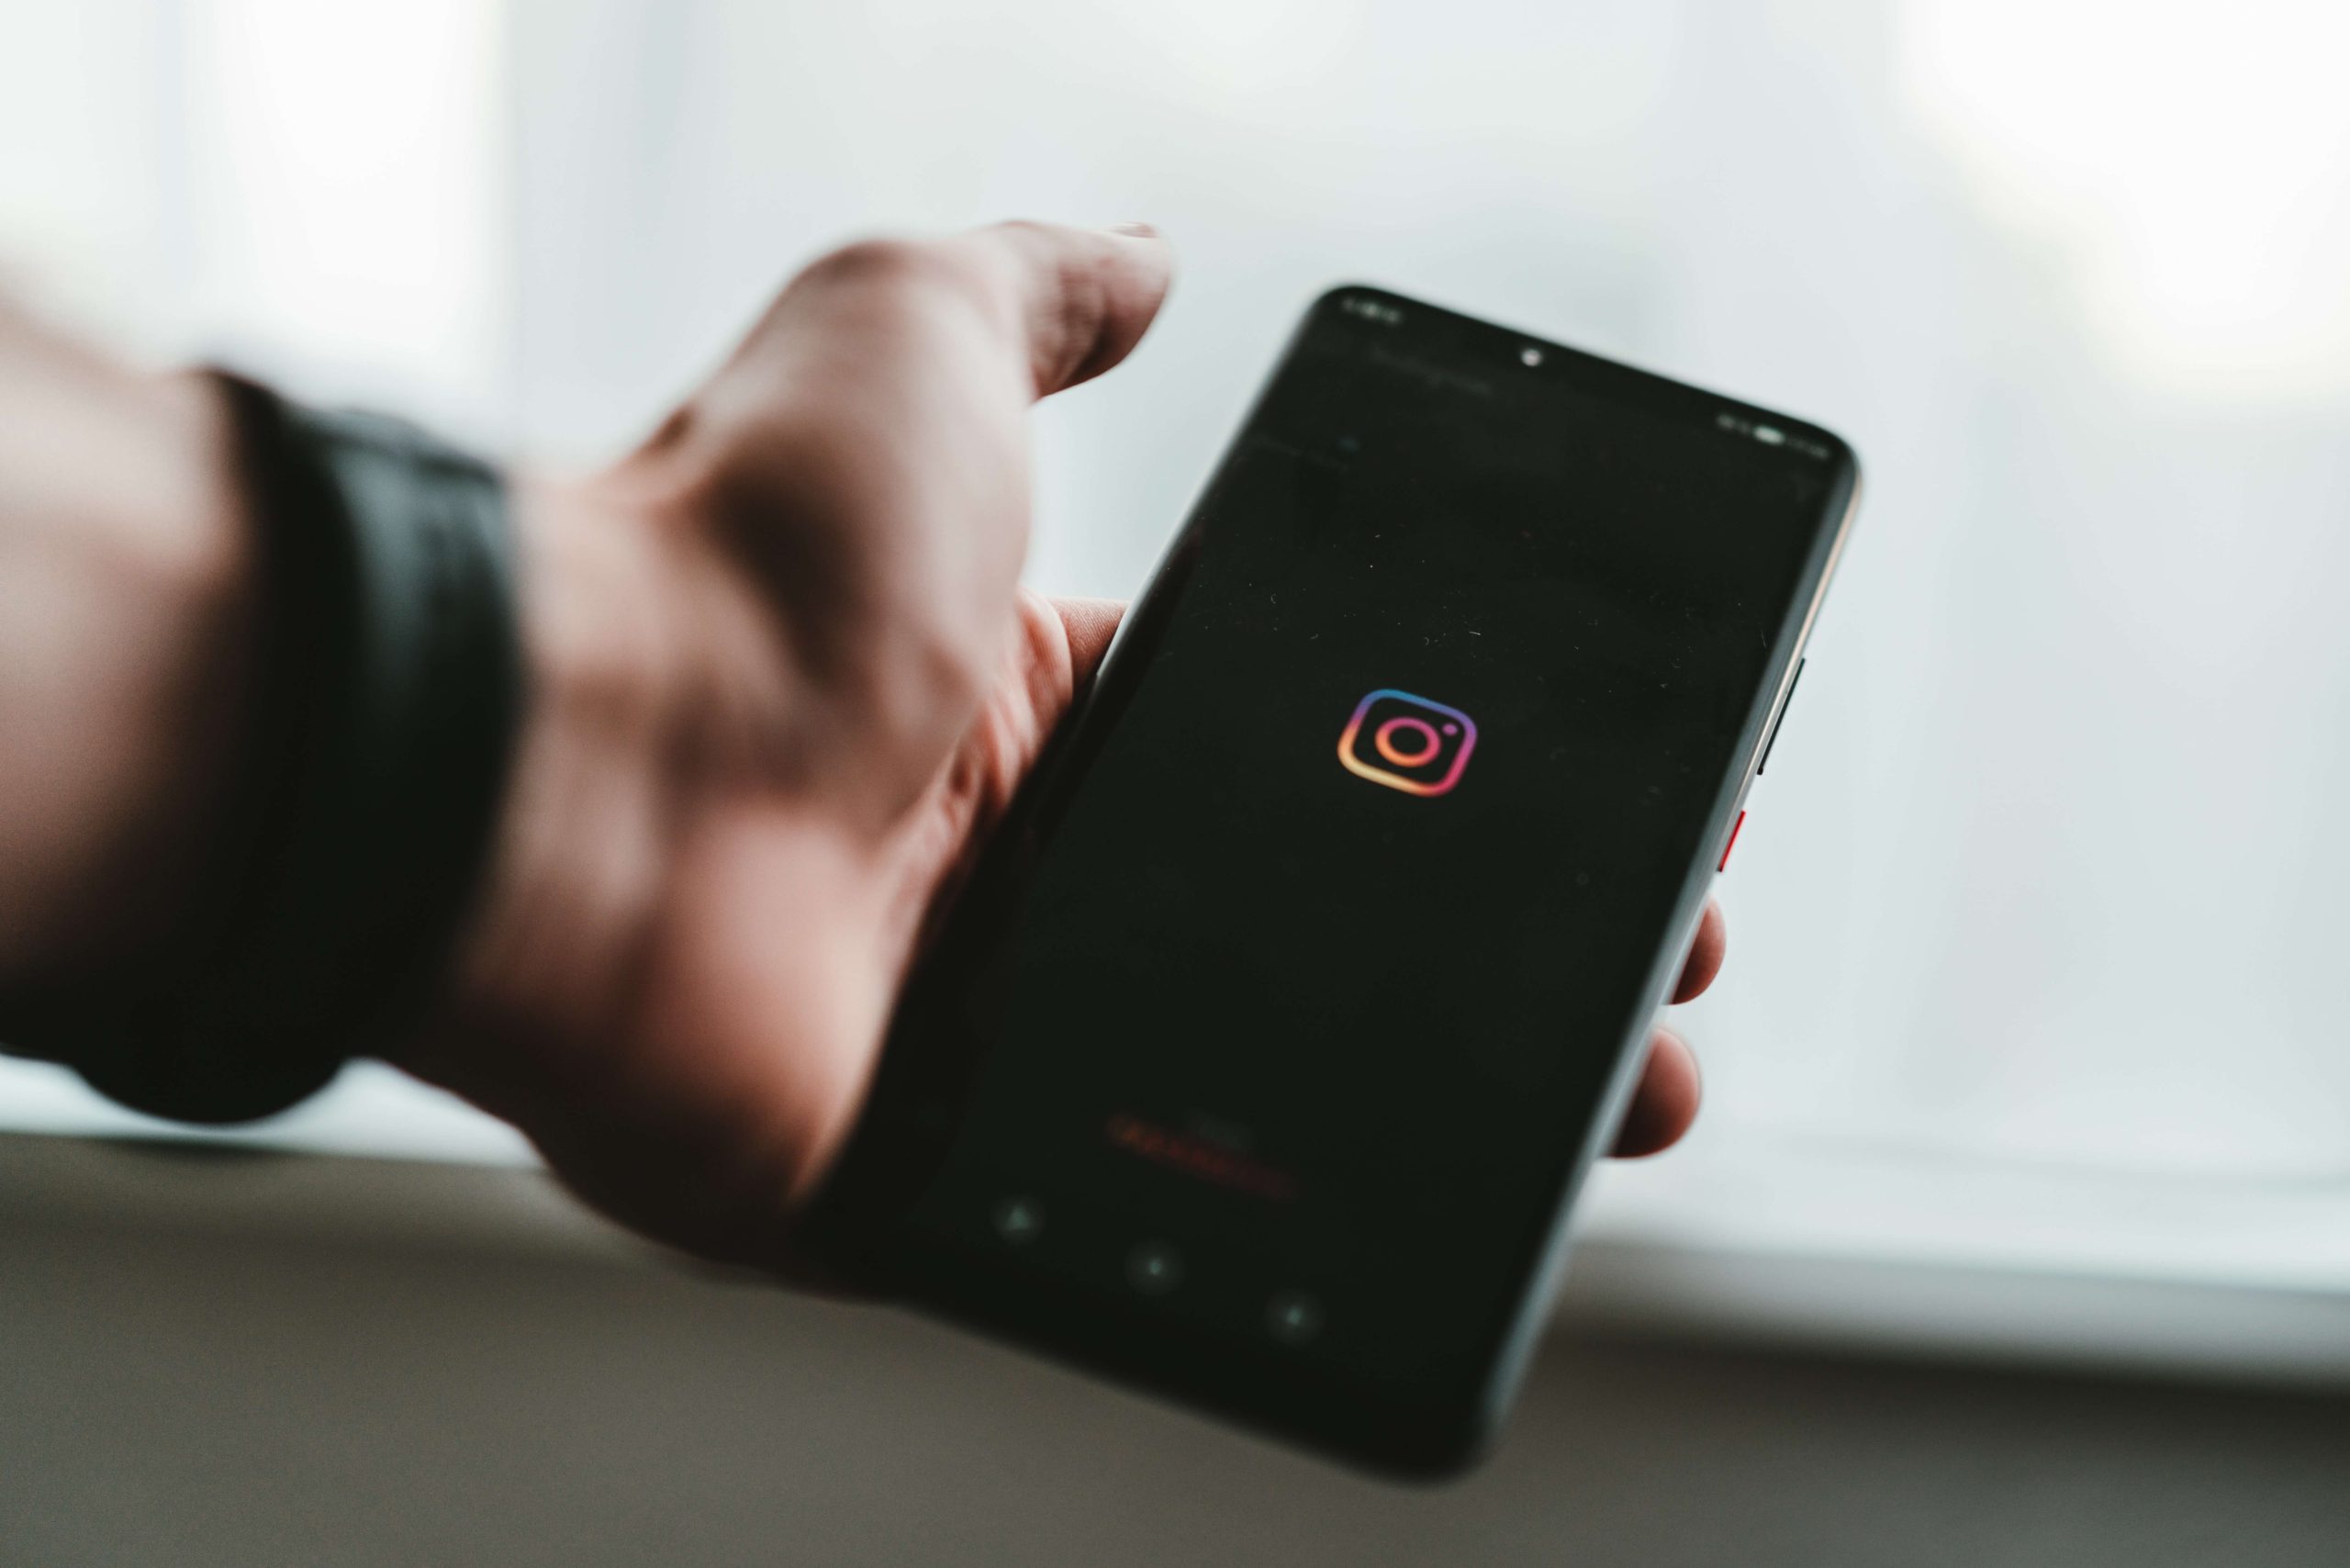 Is it time to give up on Instagram?